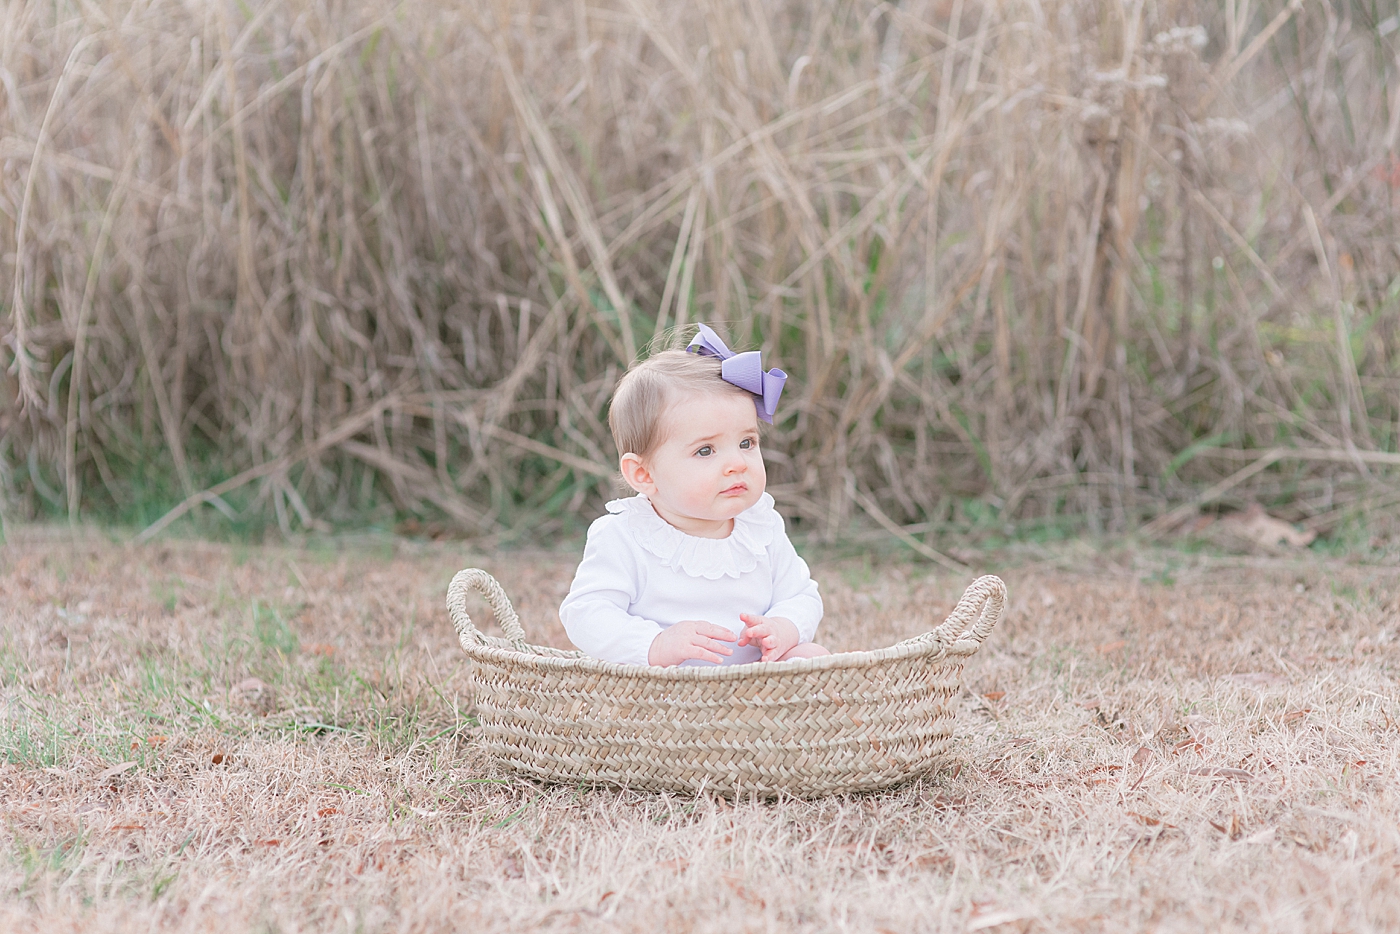 Baby with a purple bow sitting in a basket during her milestone session| Photo by Anna Wisjo Photography 